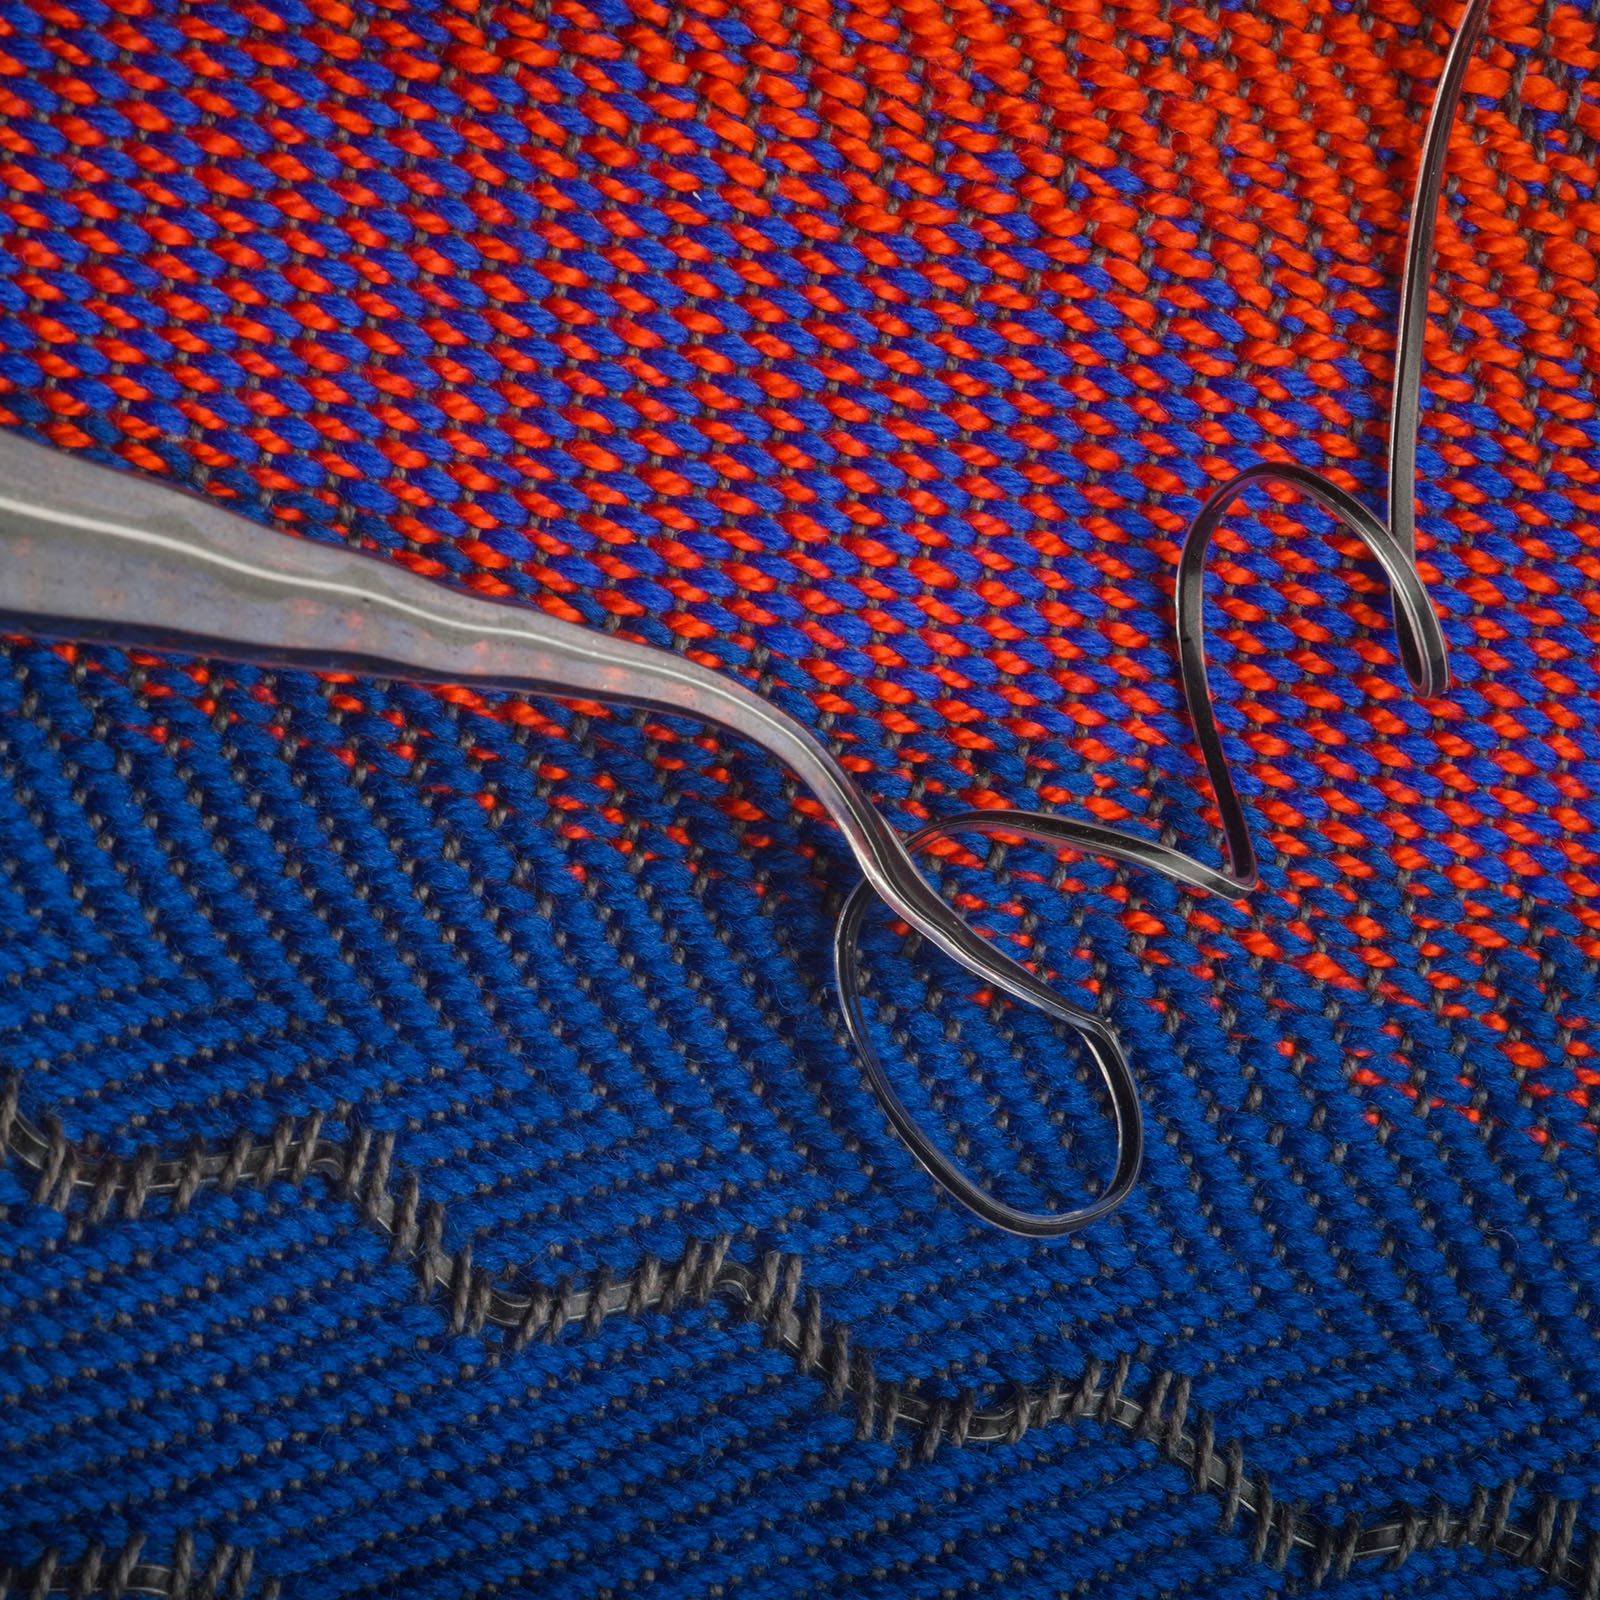 An MIT team has designed an “acoustic fabric,” woven with a fiber that is designed from a “piezoelectric” material that produces an electrical signal when bent or mechanically deformed, providing a means for the fabric to convert sound vibrations into electrical signals. (Image: Greg Hren, cropped by ISN)